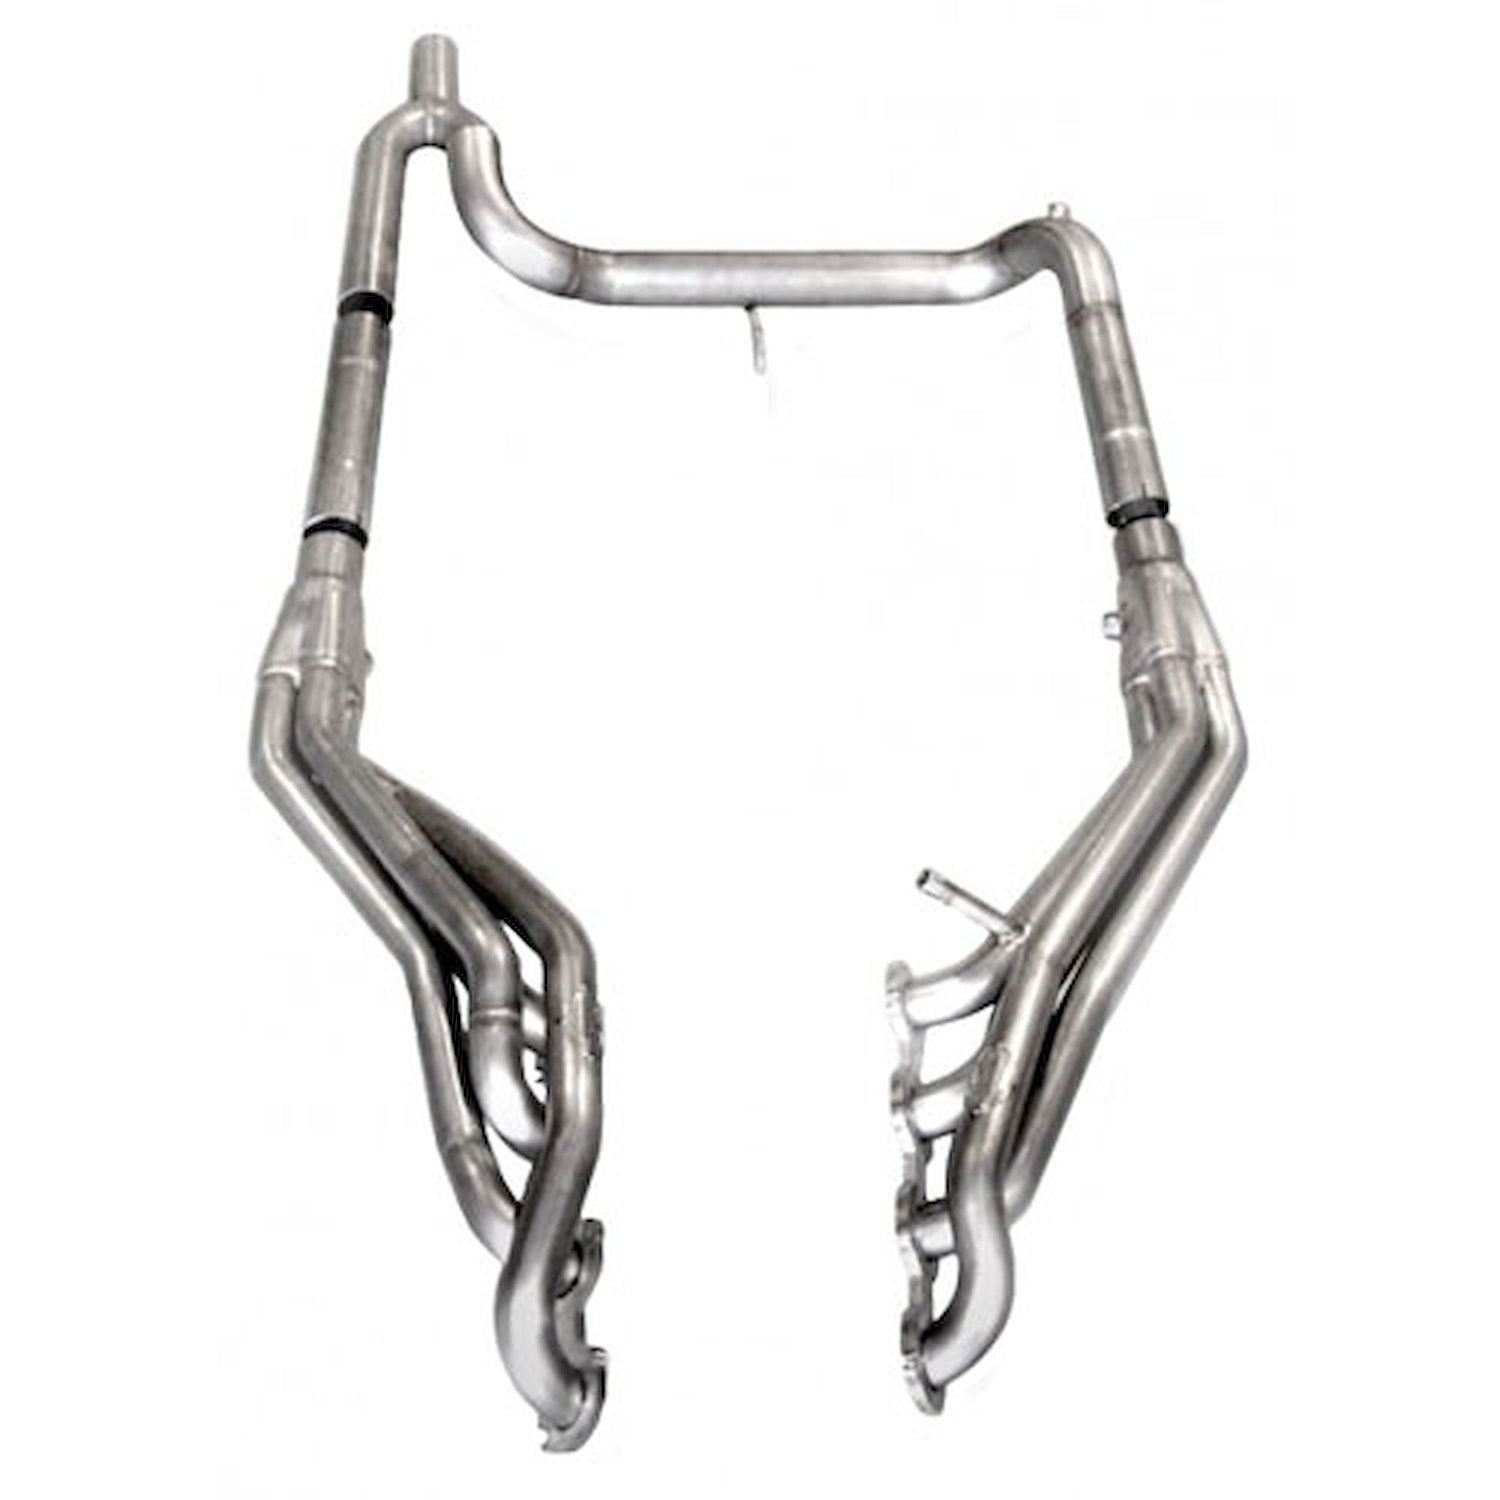 04-08 F150 4.6L HEADERS WITH 1-5/8 PRIMARIES WITH CATALYTIC CONVERTERS 2-1/2 LEAD PIPES & CLAMPS TO